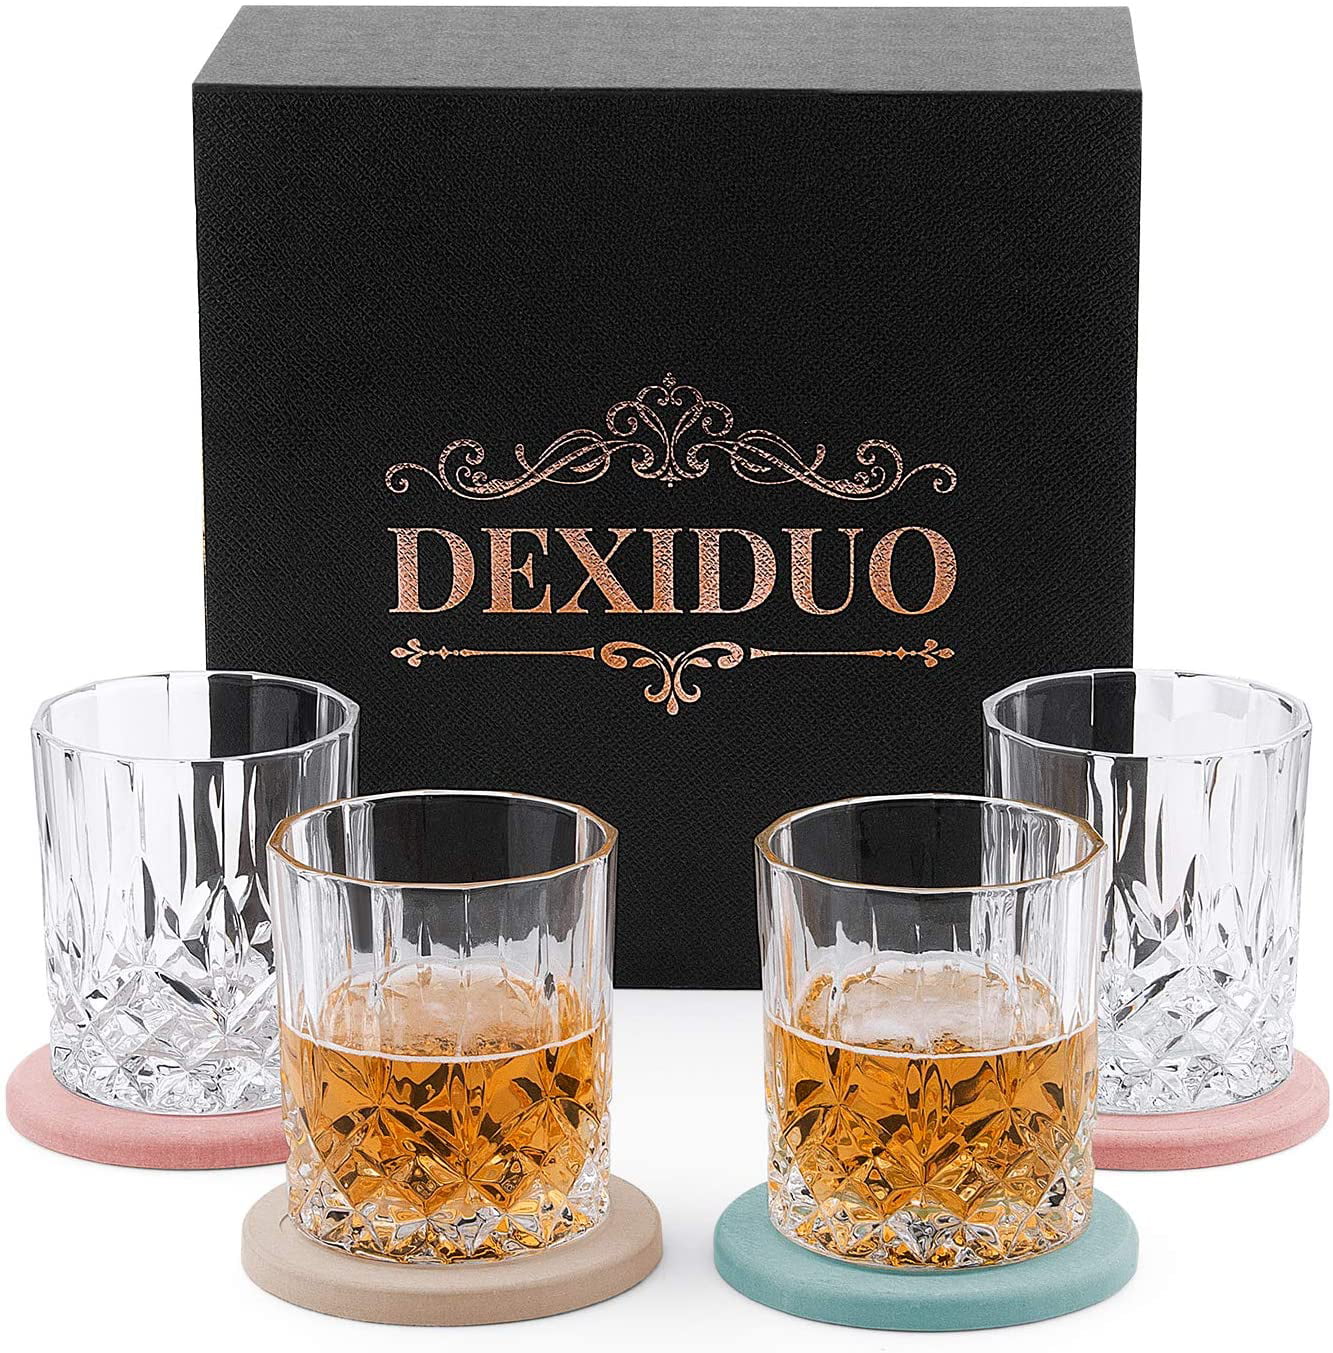 Cocktails glass set of 4 Whiskey Decanter Set for Bourbon DEXIDUO Crystal Whiskey Glasses with Luxury Box and 4 Drink Coasters Scotch Whisky Cognac Old Fashioned Cocktail Tumblers 